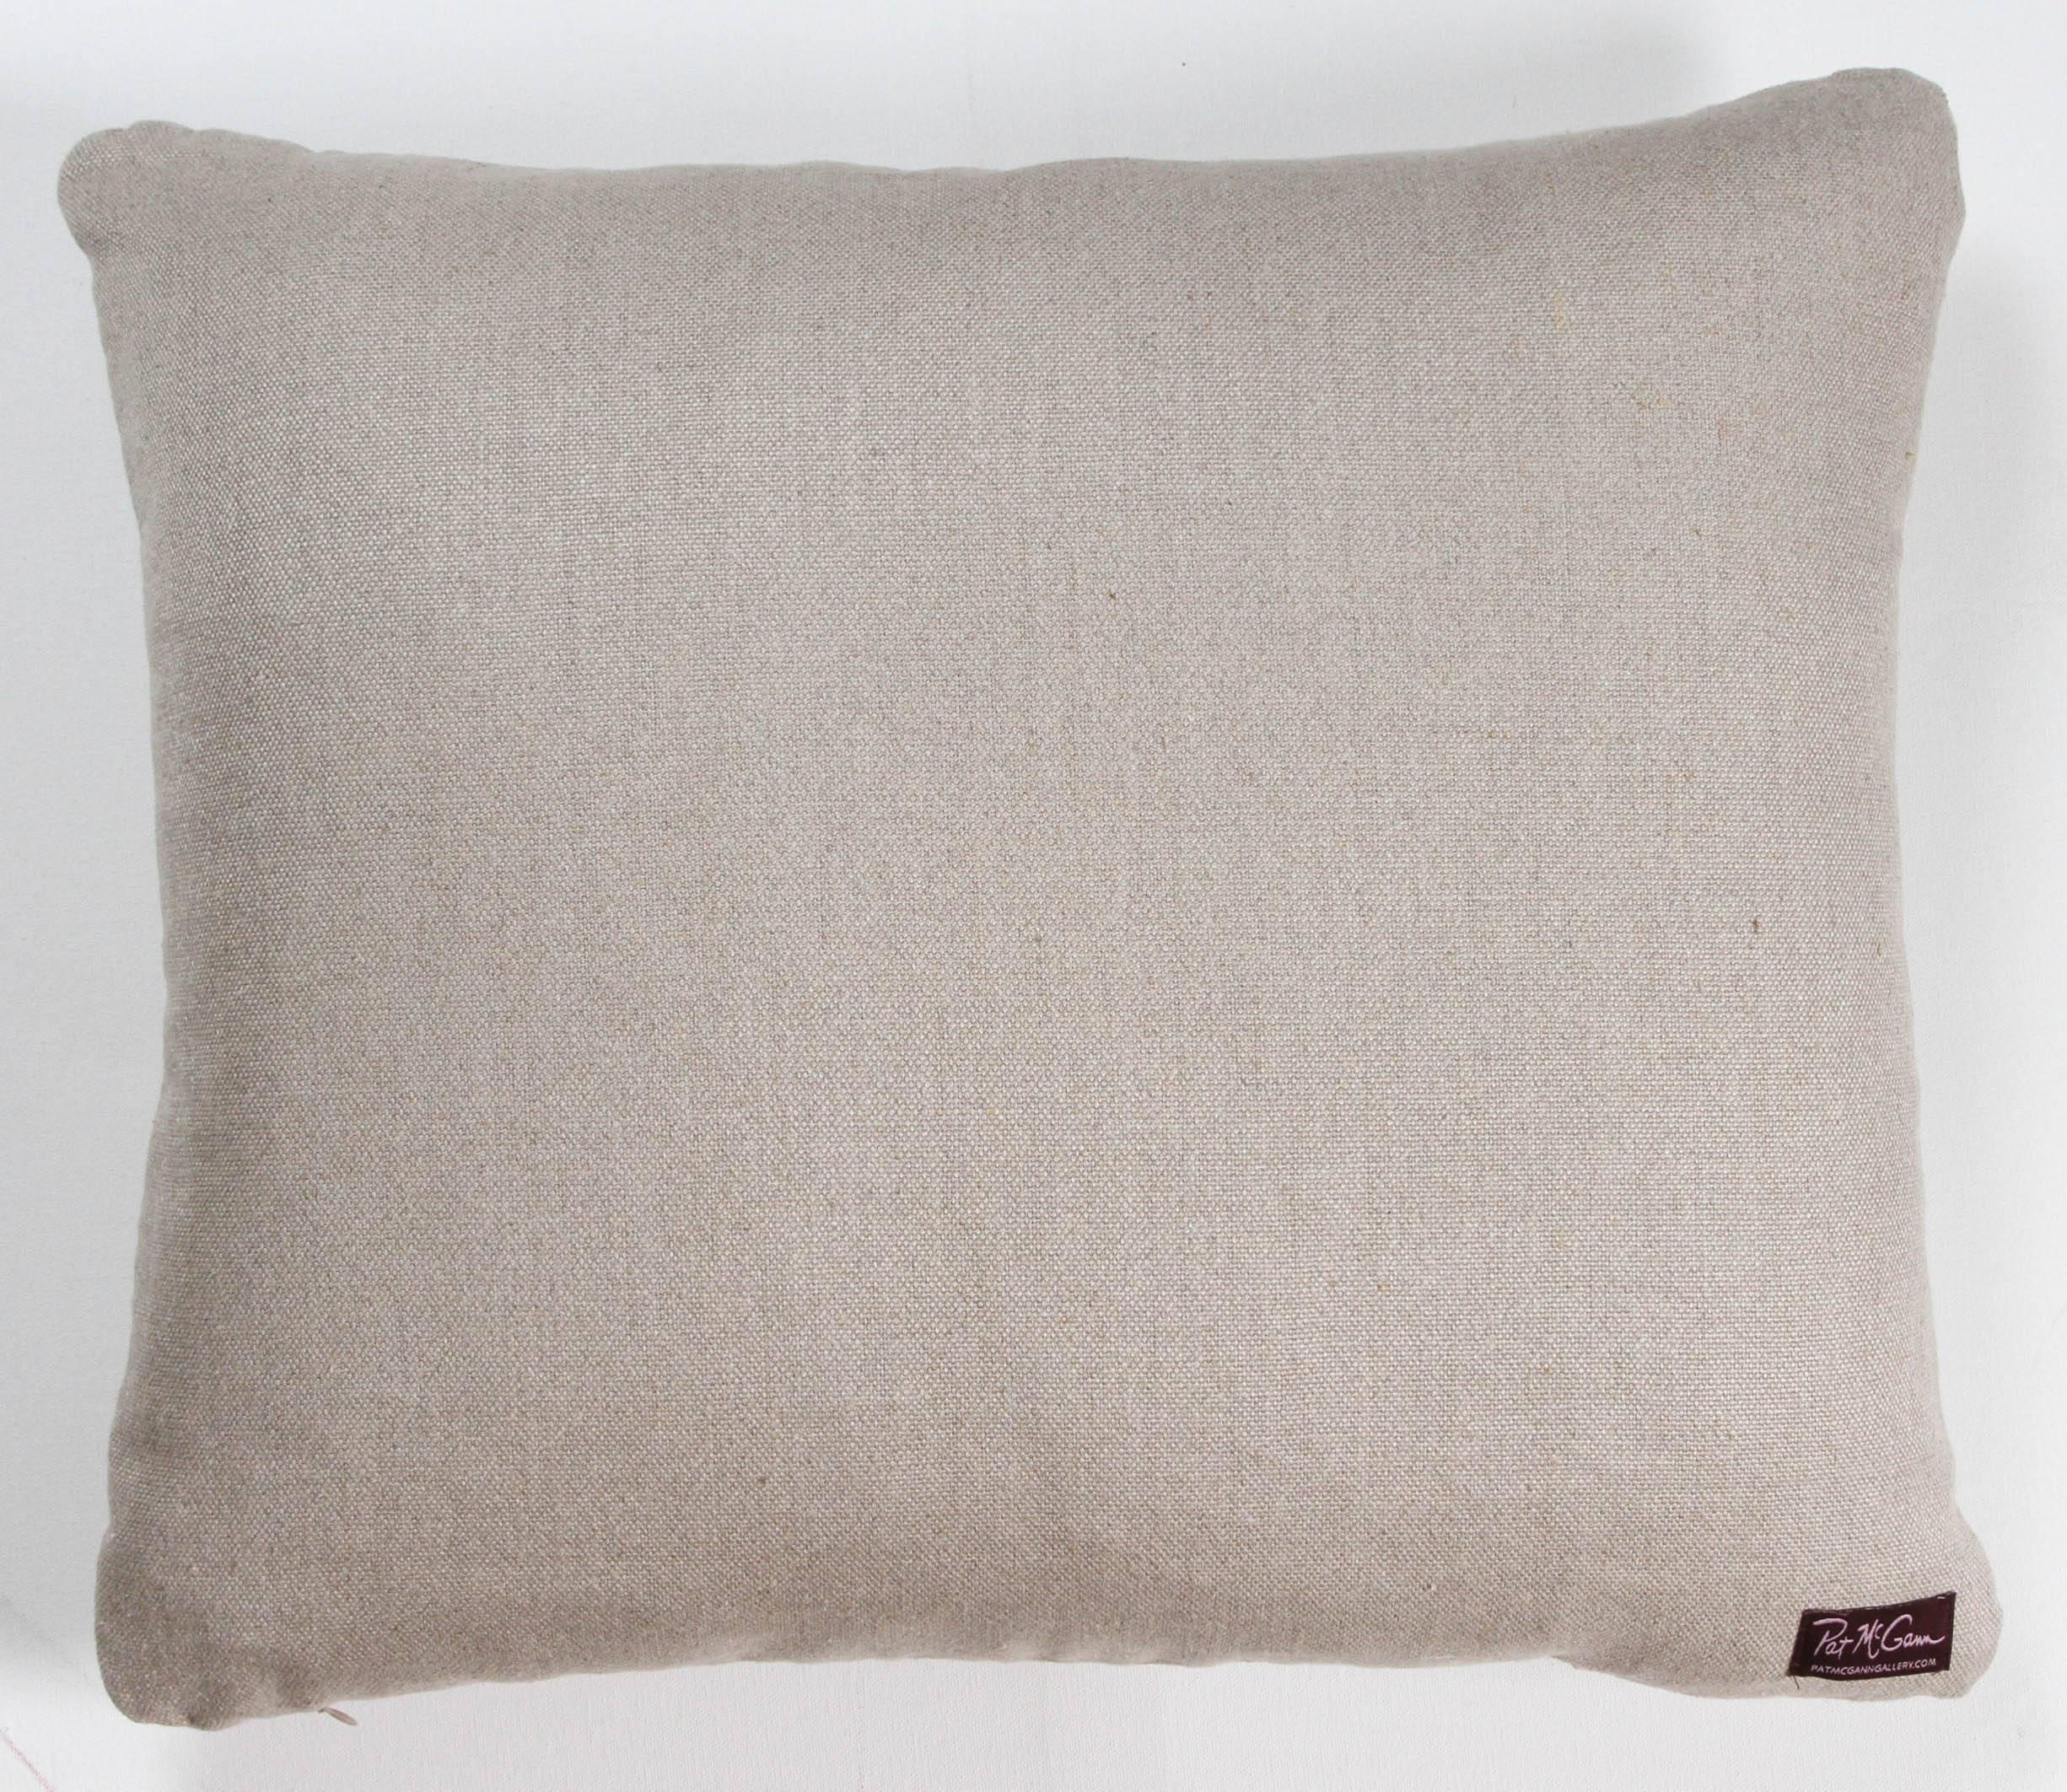 Embroidered African Embroidery Pillow in Ivory and Beige